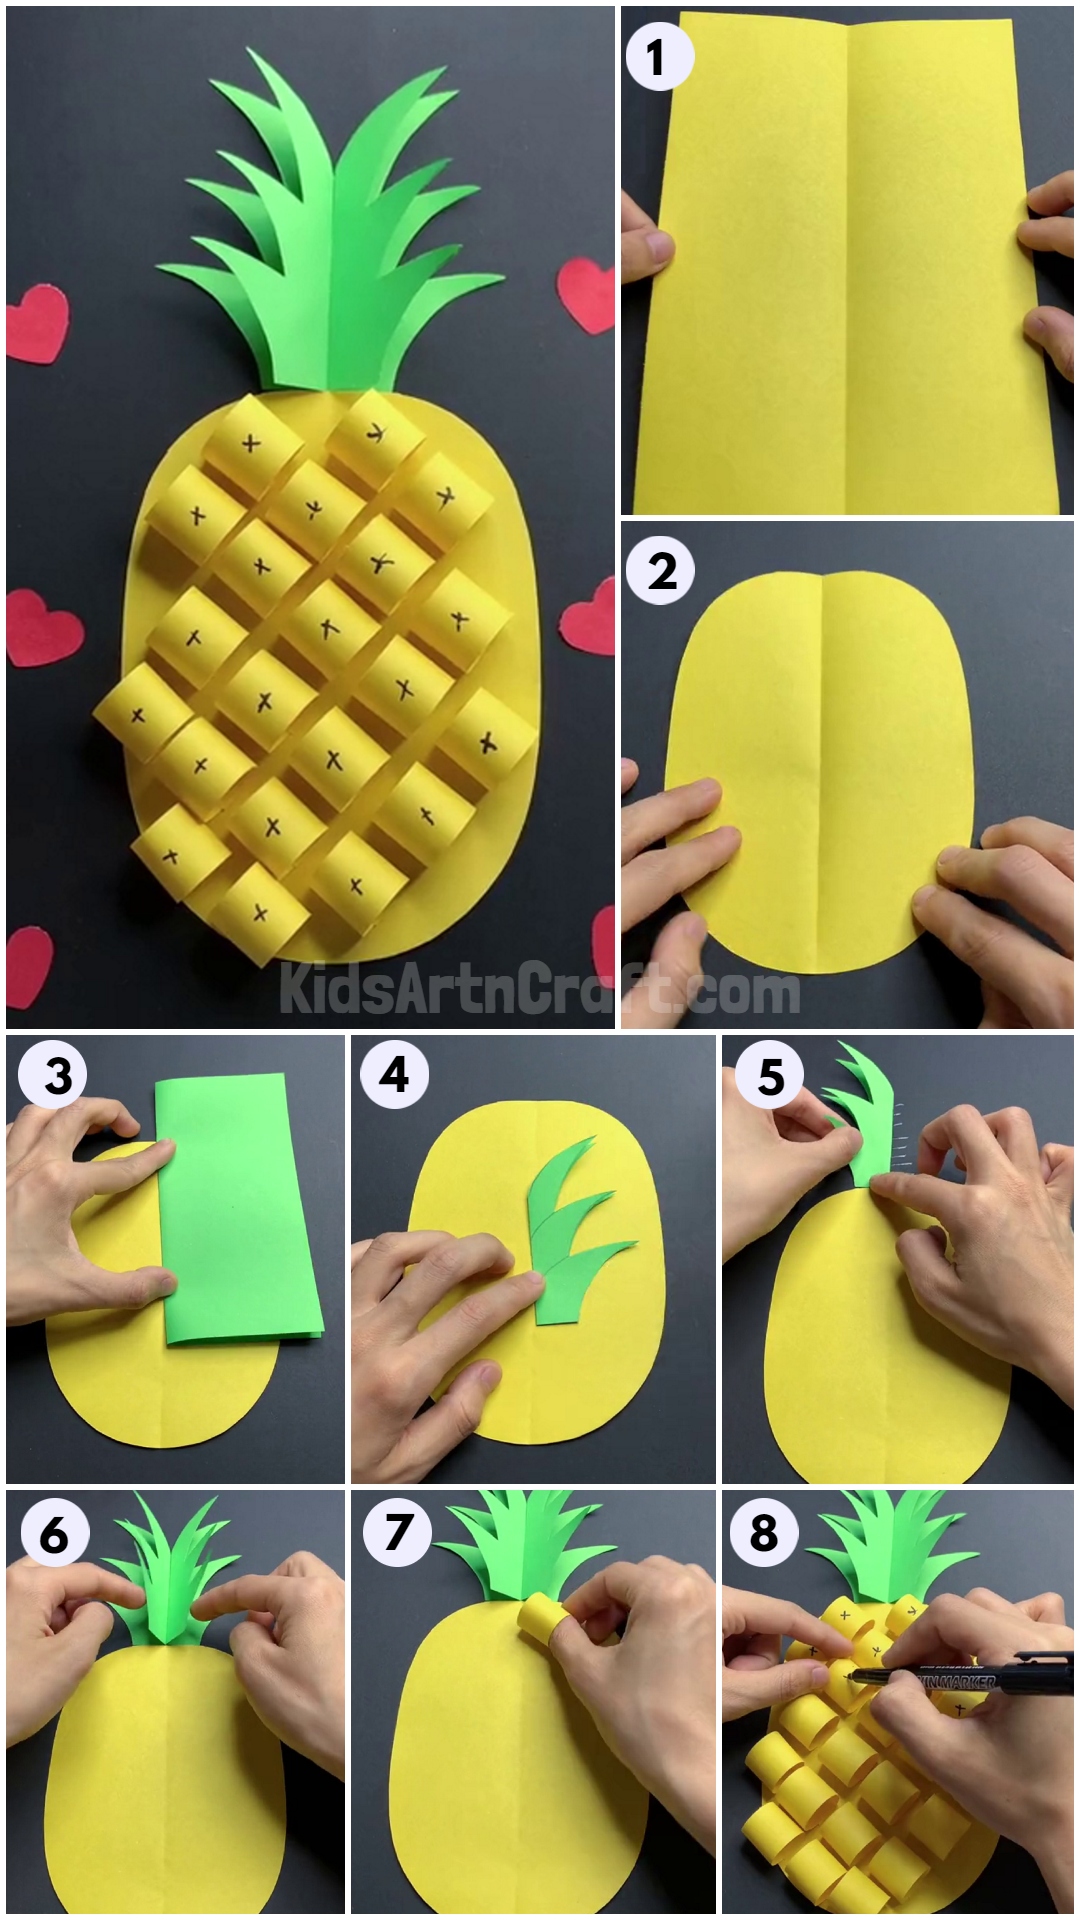 How to Make 3D Paper Pineapple Craft for Kids